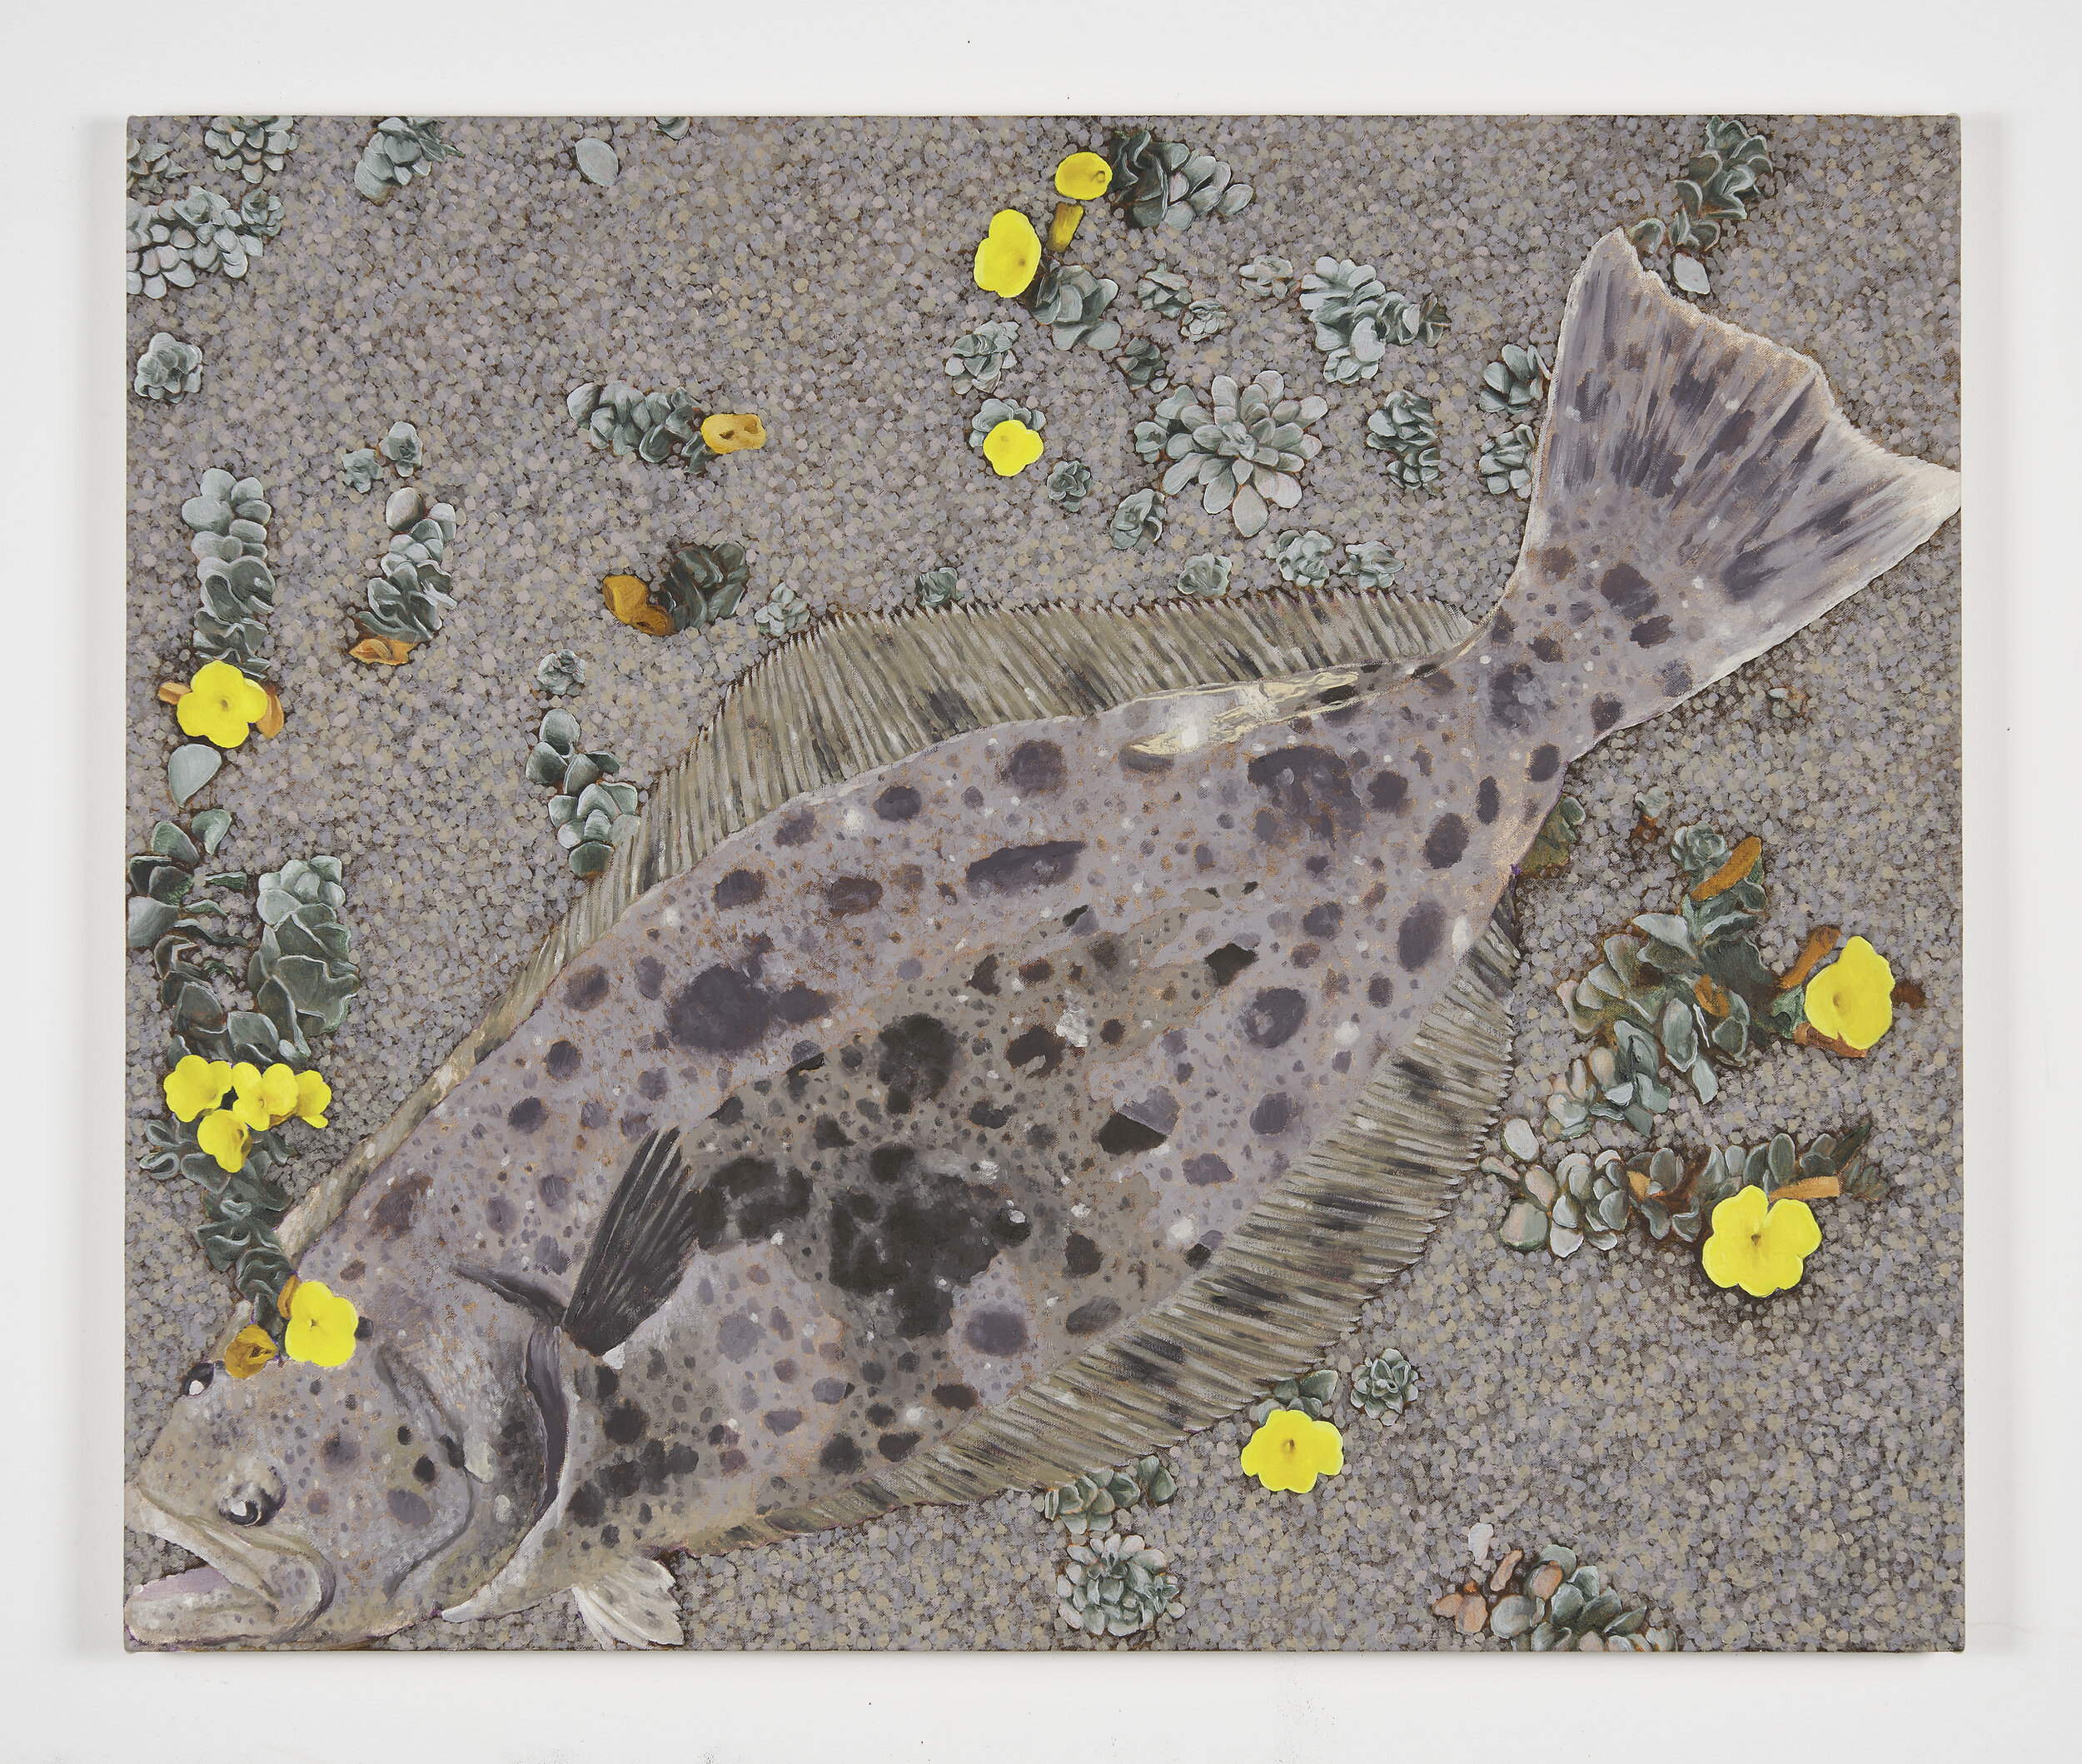   Adam Higgins   California Halibut with coastal poppies  2019 Oil on canvas 30 x 36 inches 